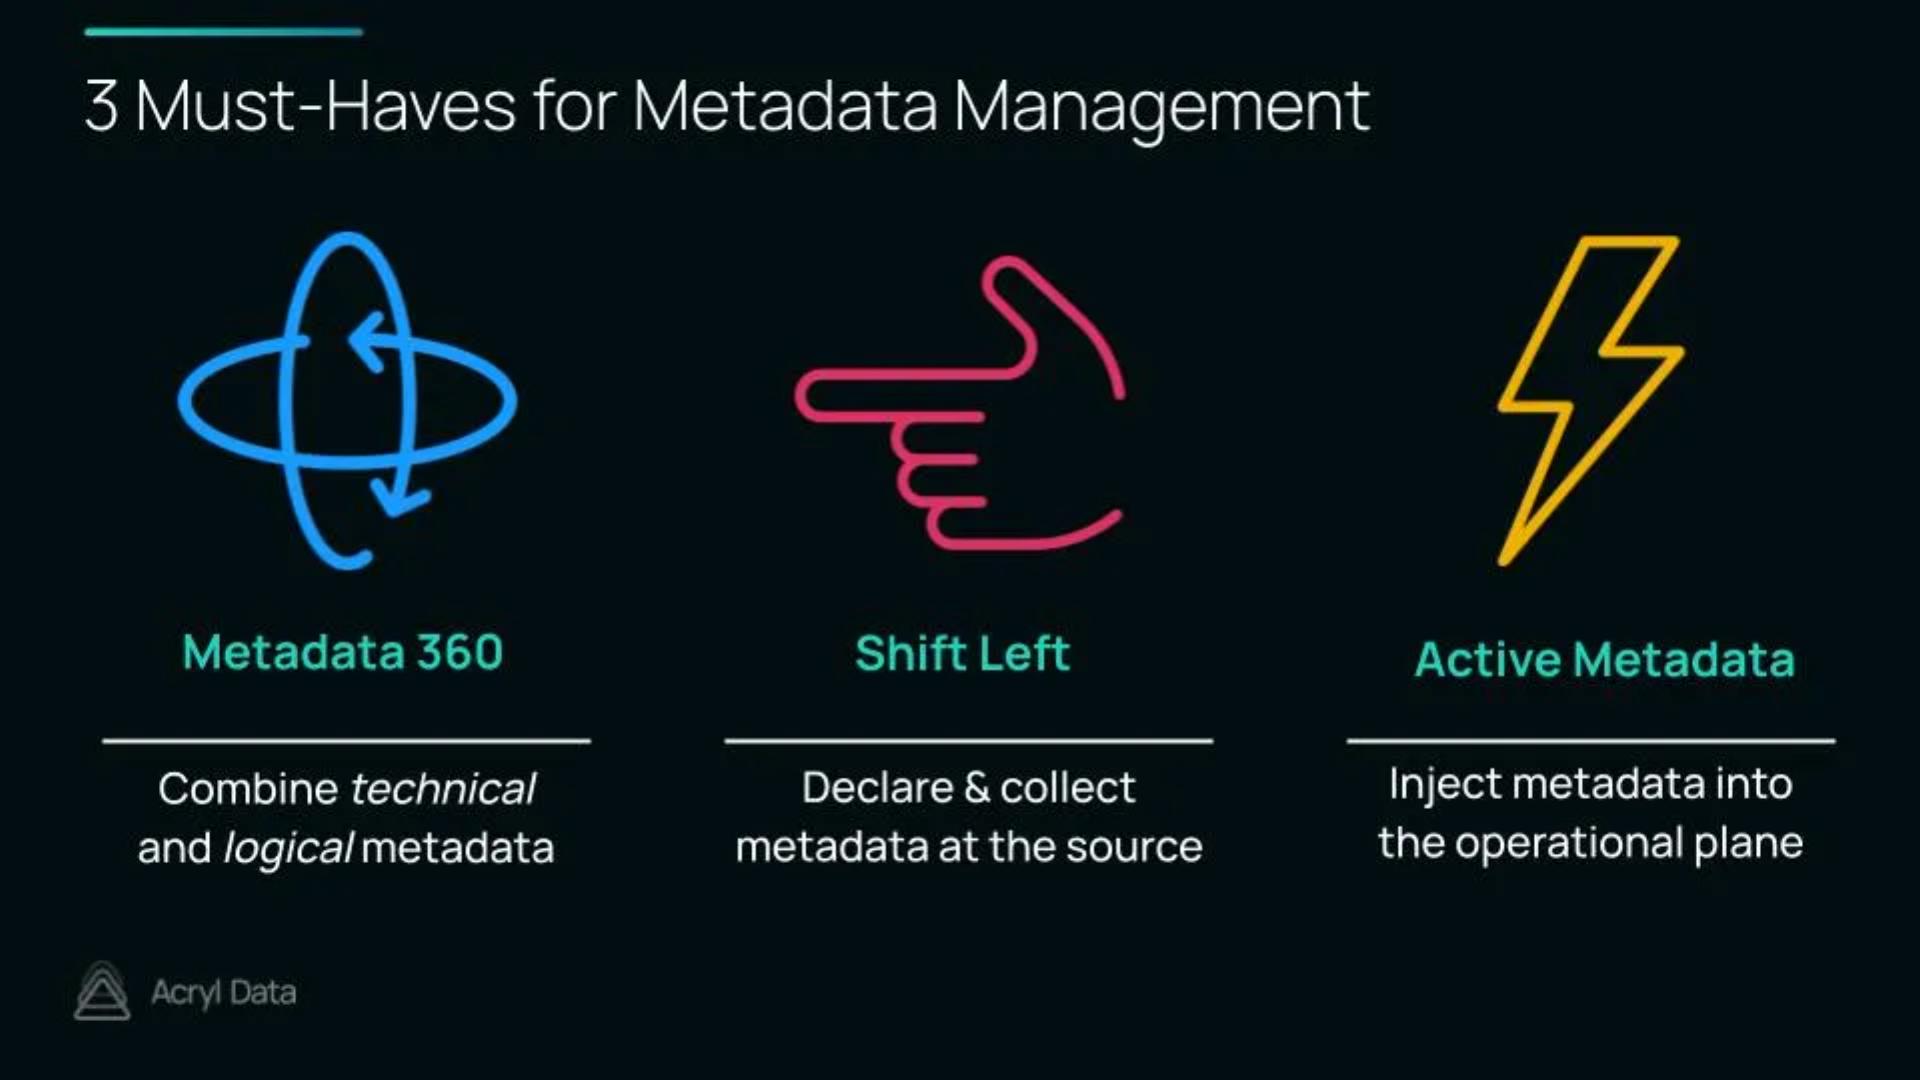 3 Must-Haves for Metadata Management